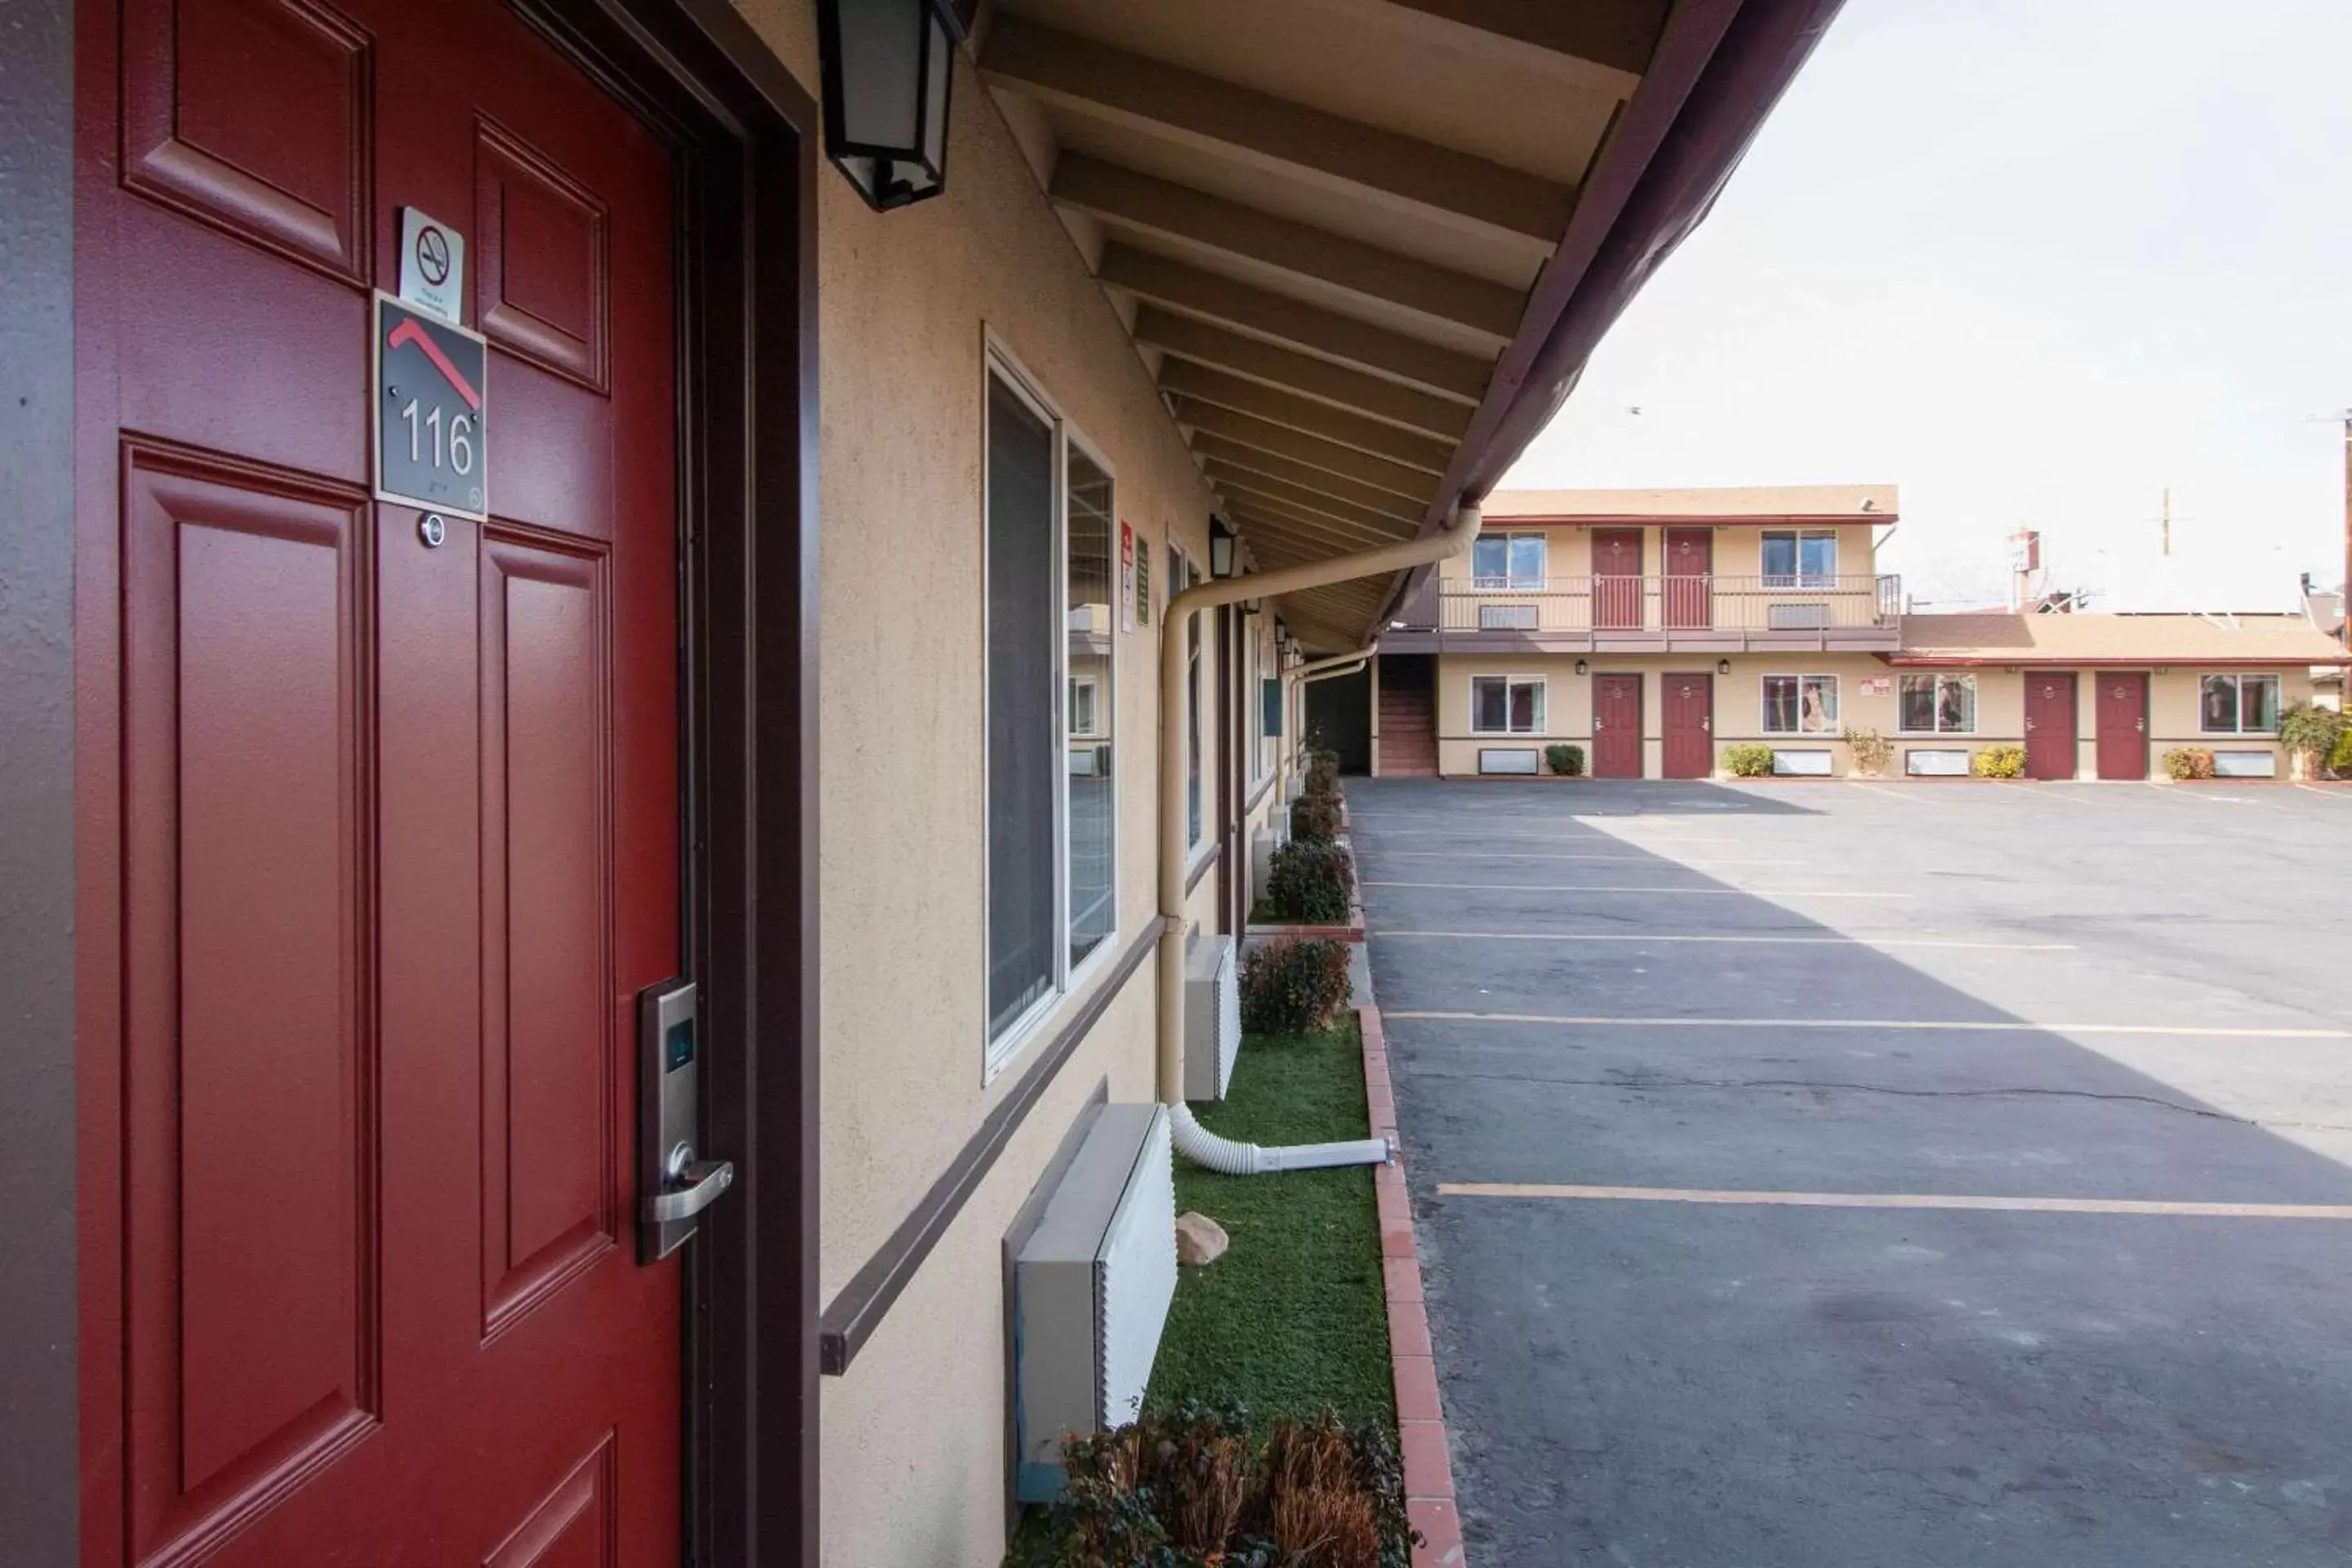 Property building in Quality Inn Bishop near Mammoth